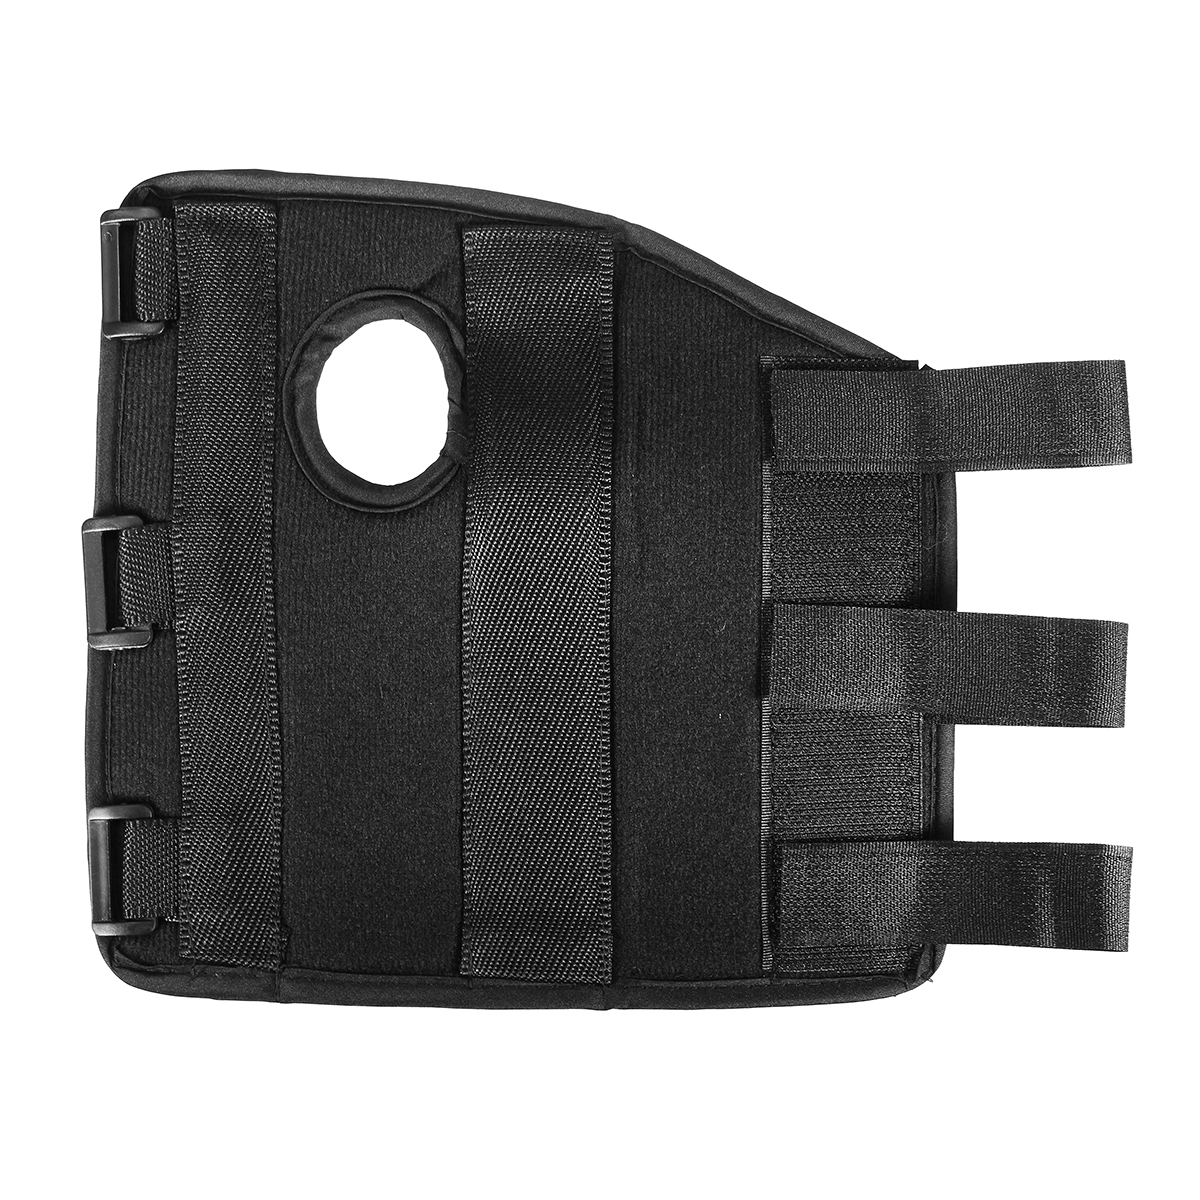 1Pair-Right-Left-Hands-Breathable-Night-Wrist-Brace-Sleep-Support-Carpal-Tunnel-Comfort-Composite-Fa-1212318-10